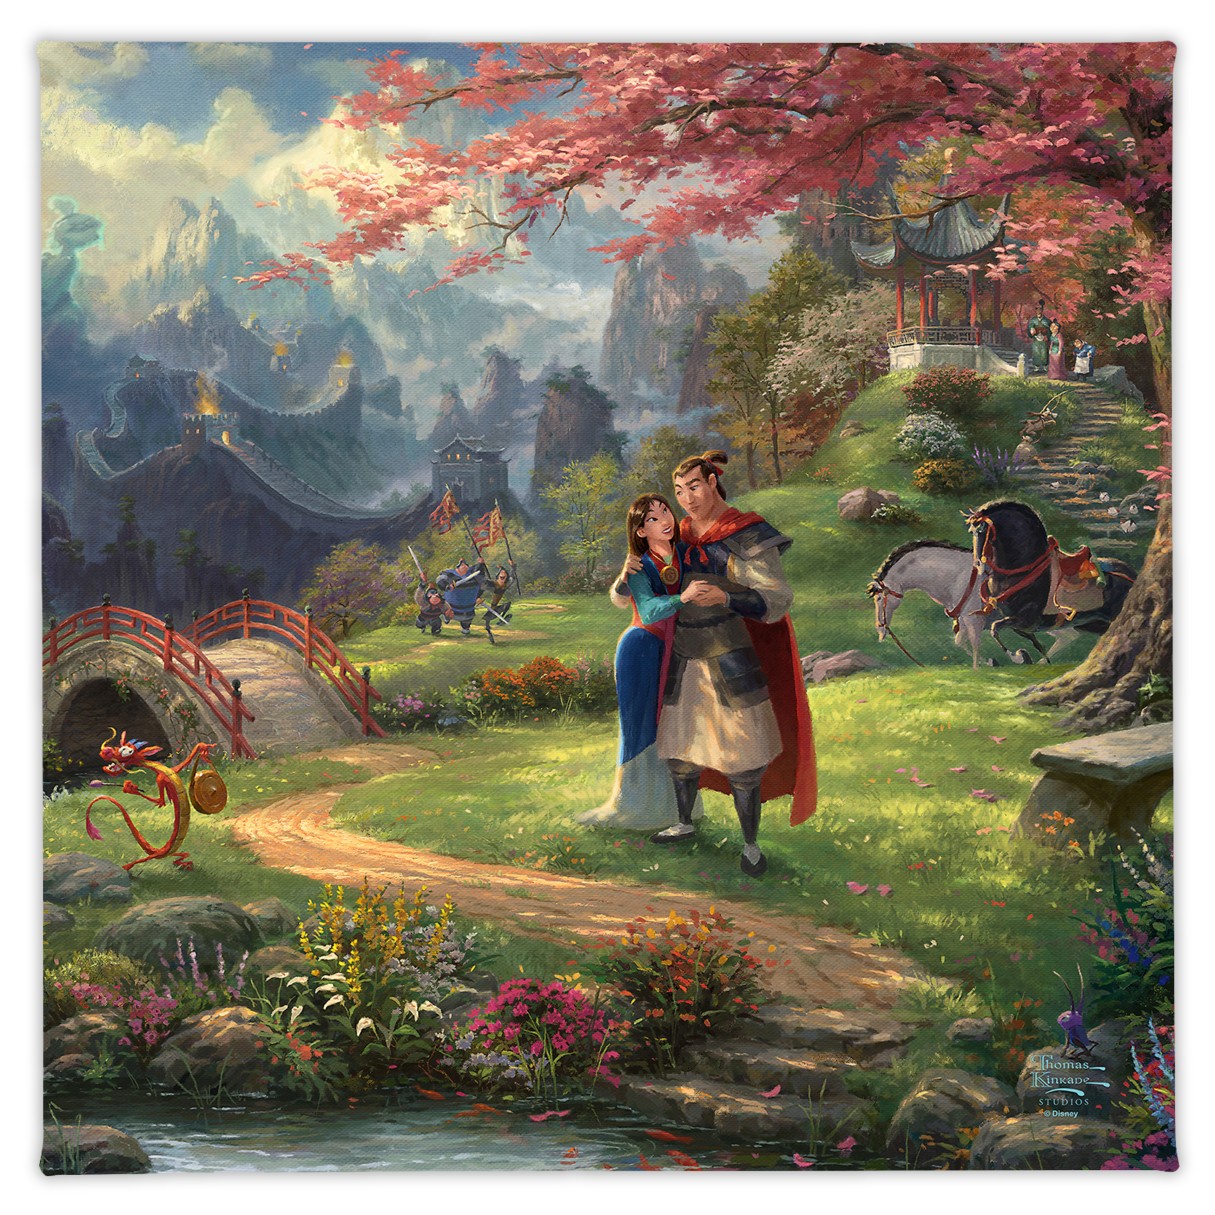 Mulan Blossoms of Love'' Gallery Wrapped Canvas by Thomas Kinkade